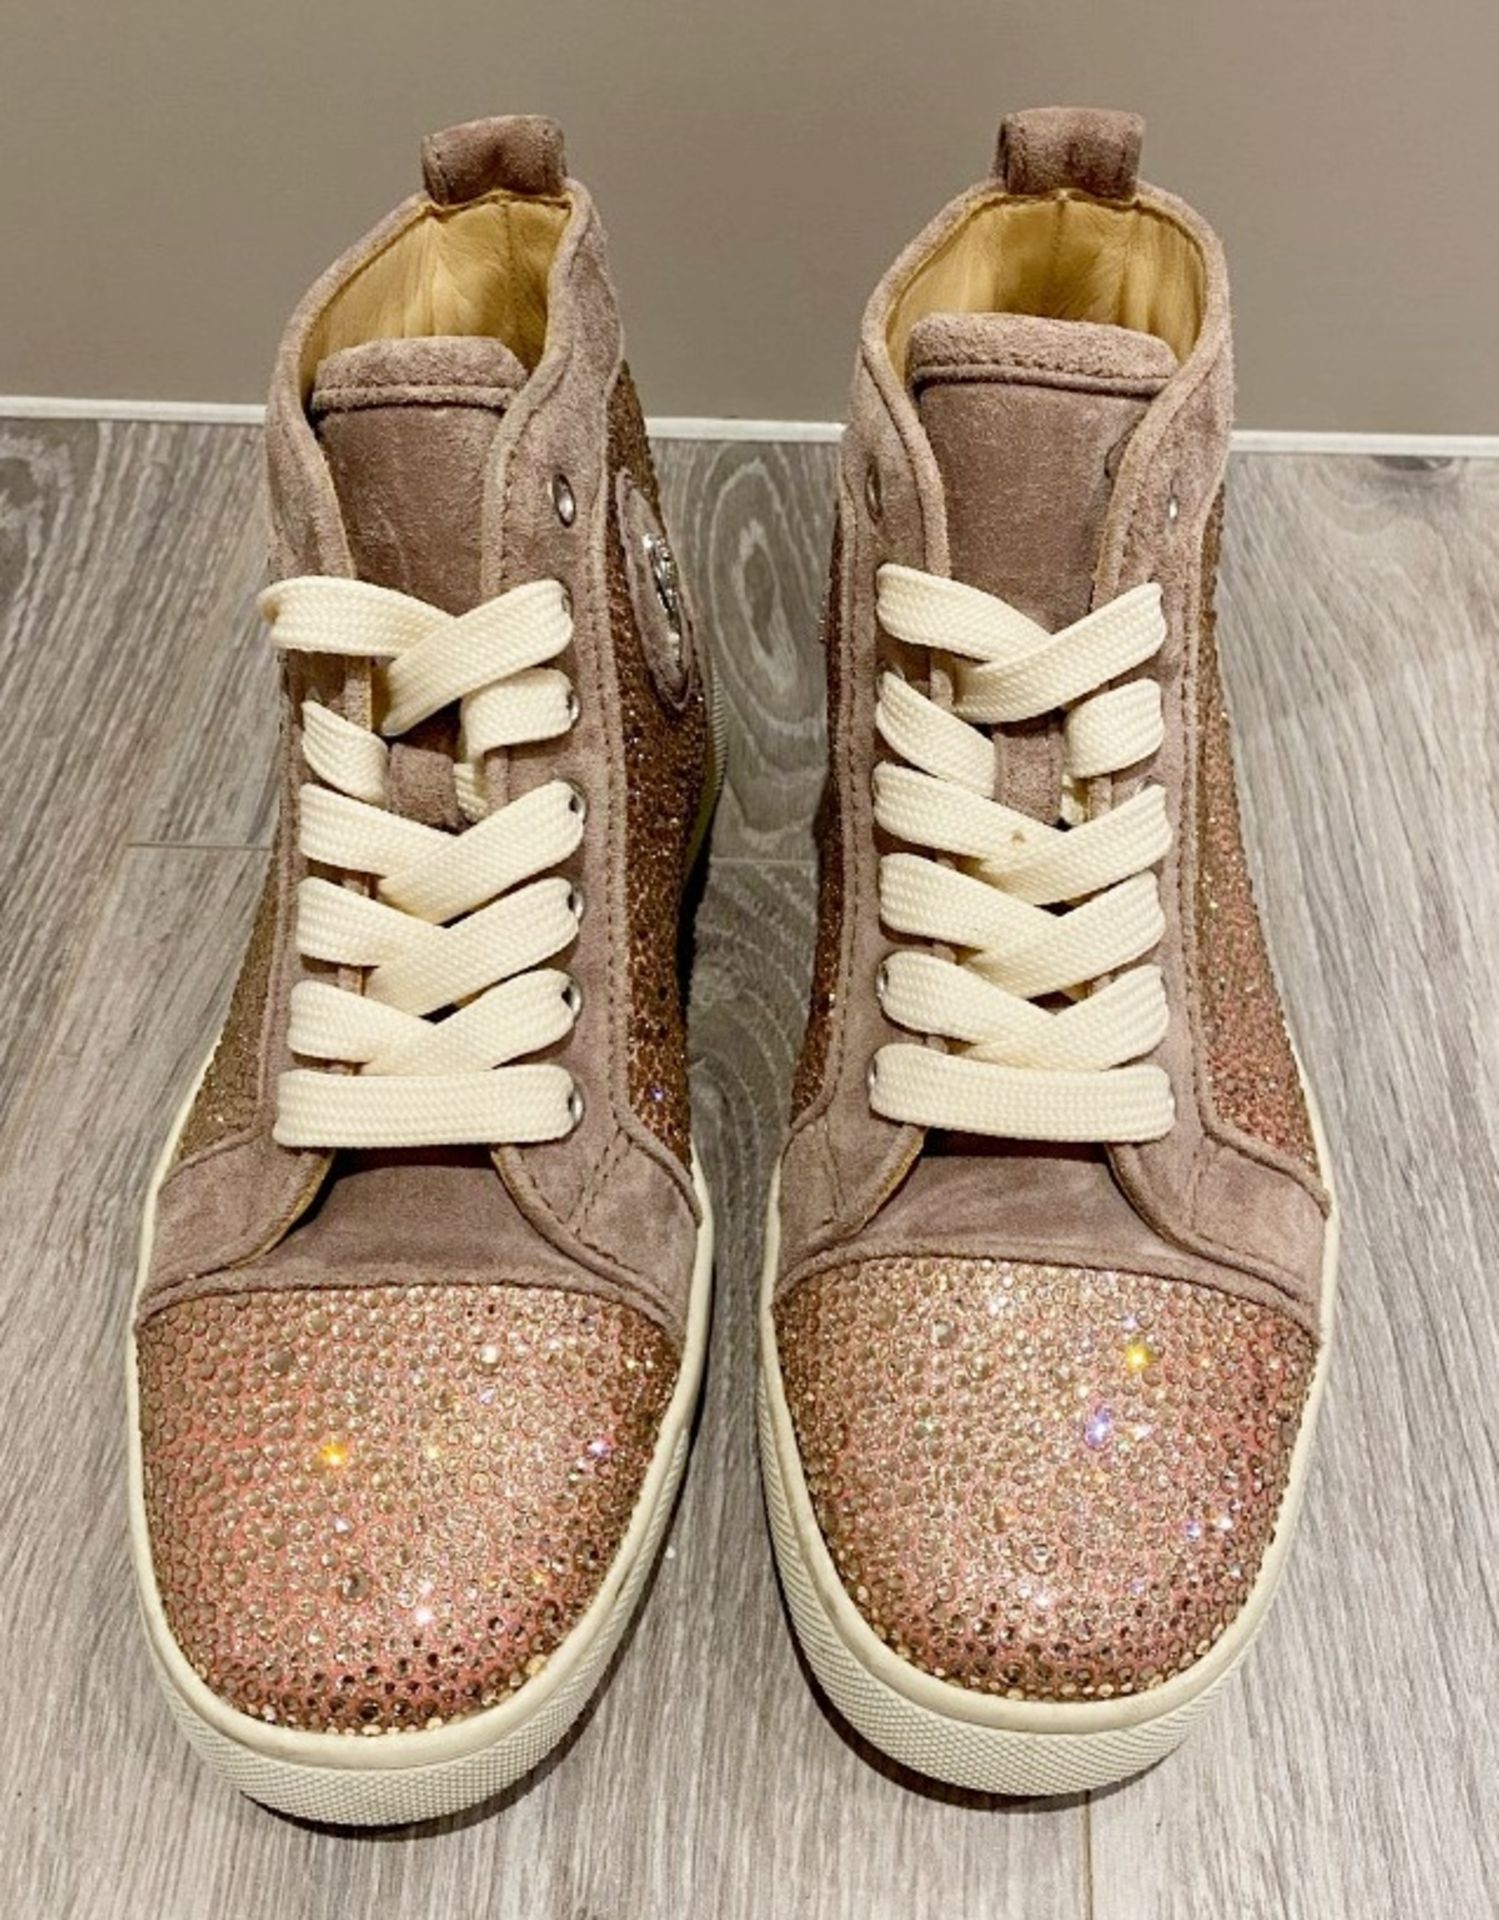 1 x Pair Of Genuine Christain Louboutin Sneakers In Pink - Size: 36 - Preowned in Good Condition - R - Image 2 of 5